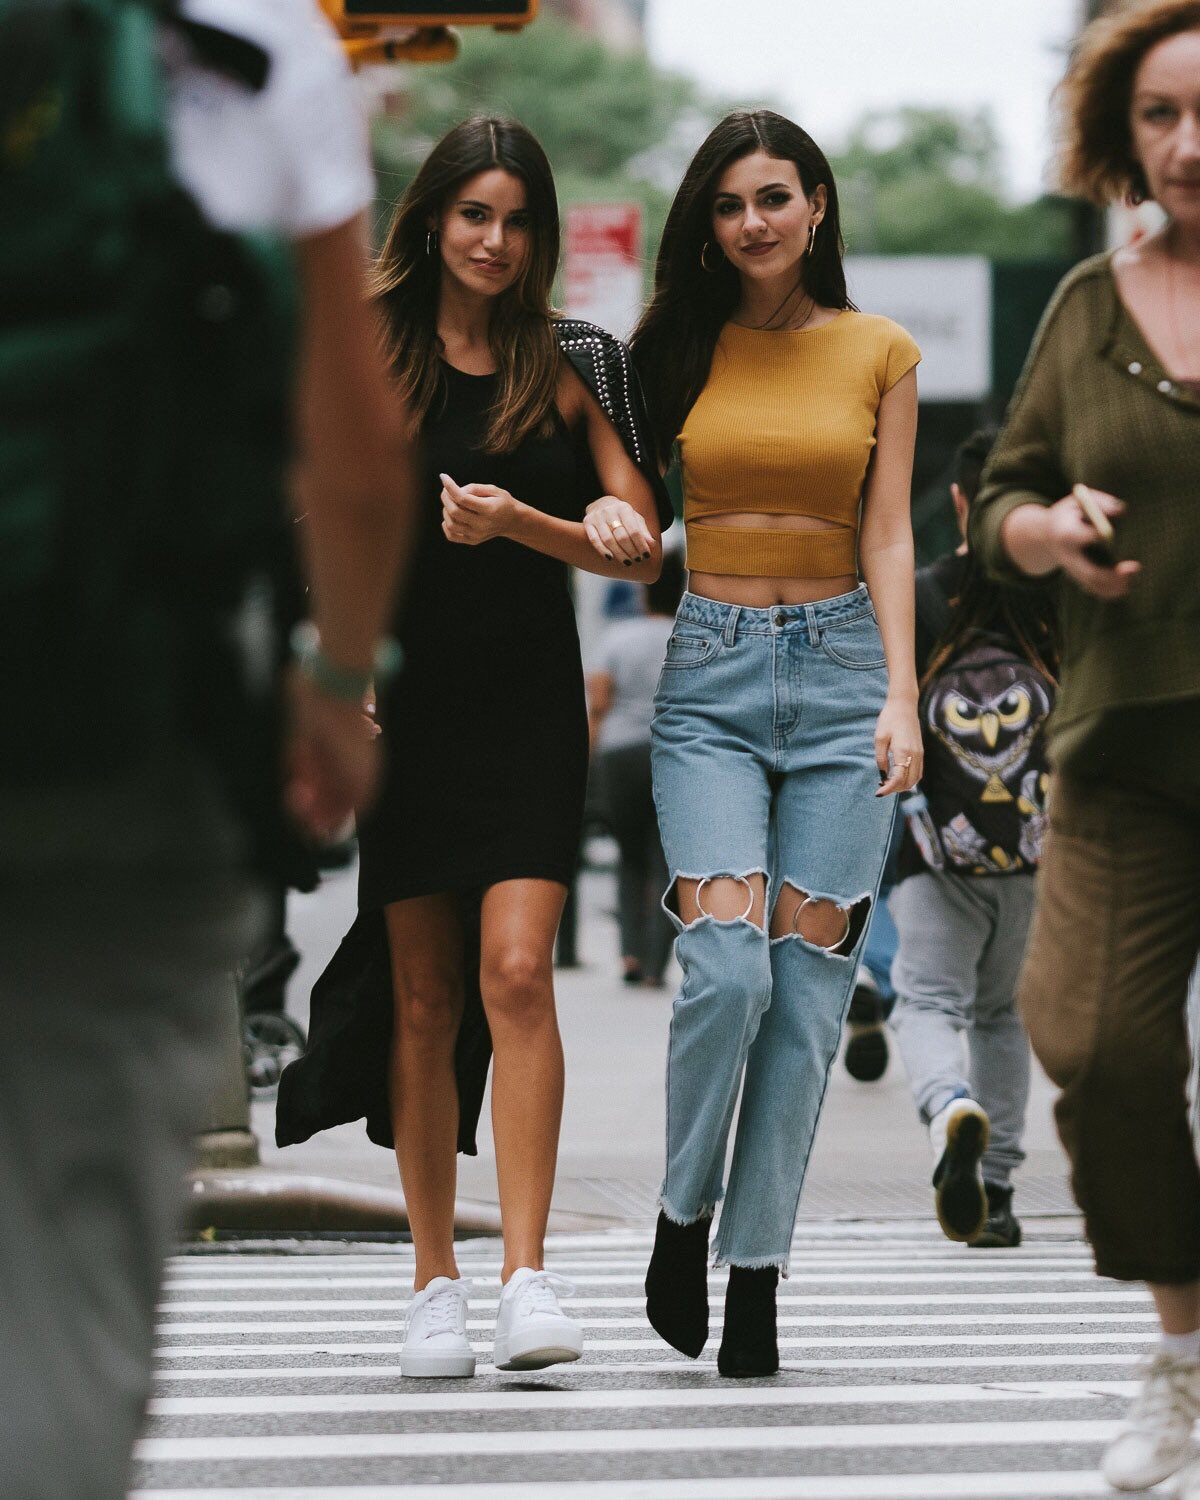 Victoria Justice and Madison Reed by Paul Mauer Photoshoot 2018 -07 ...